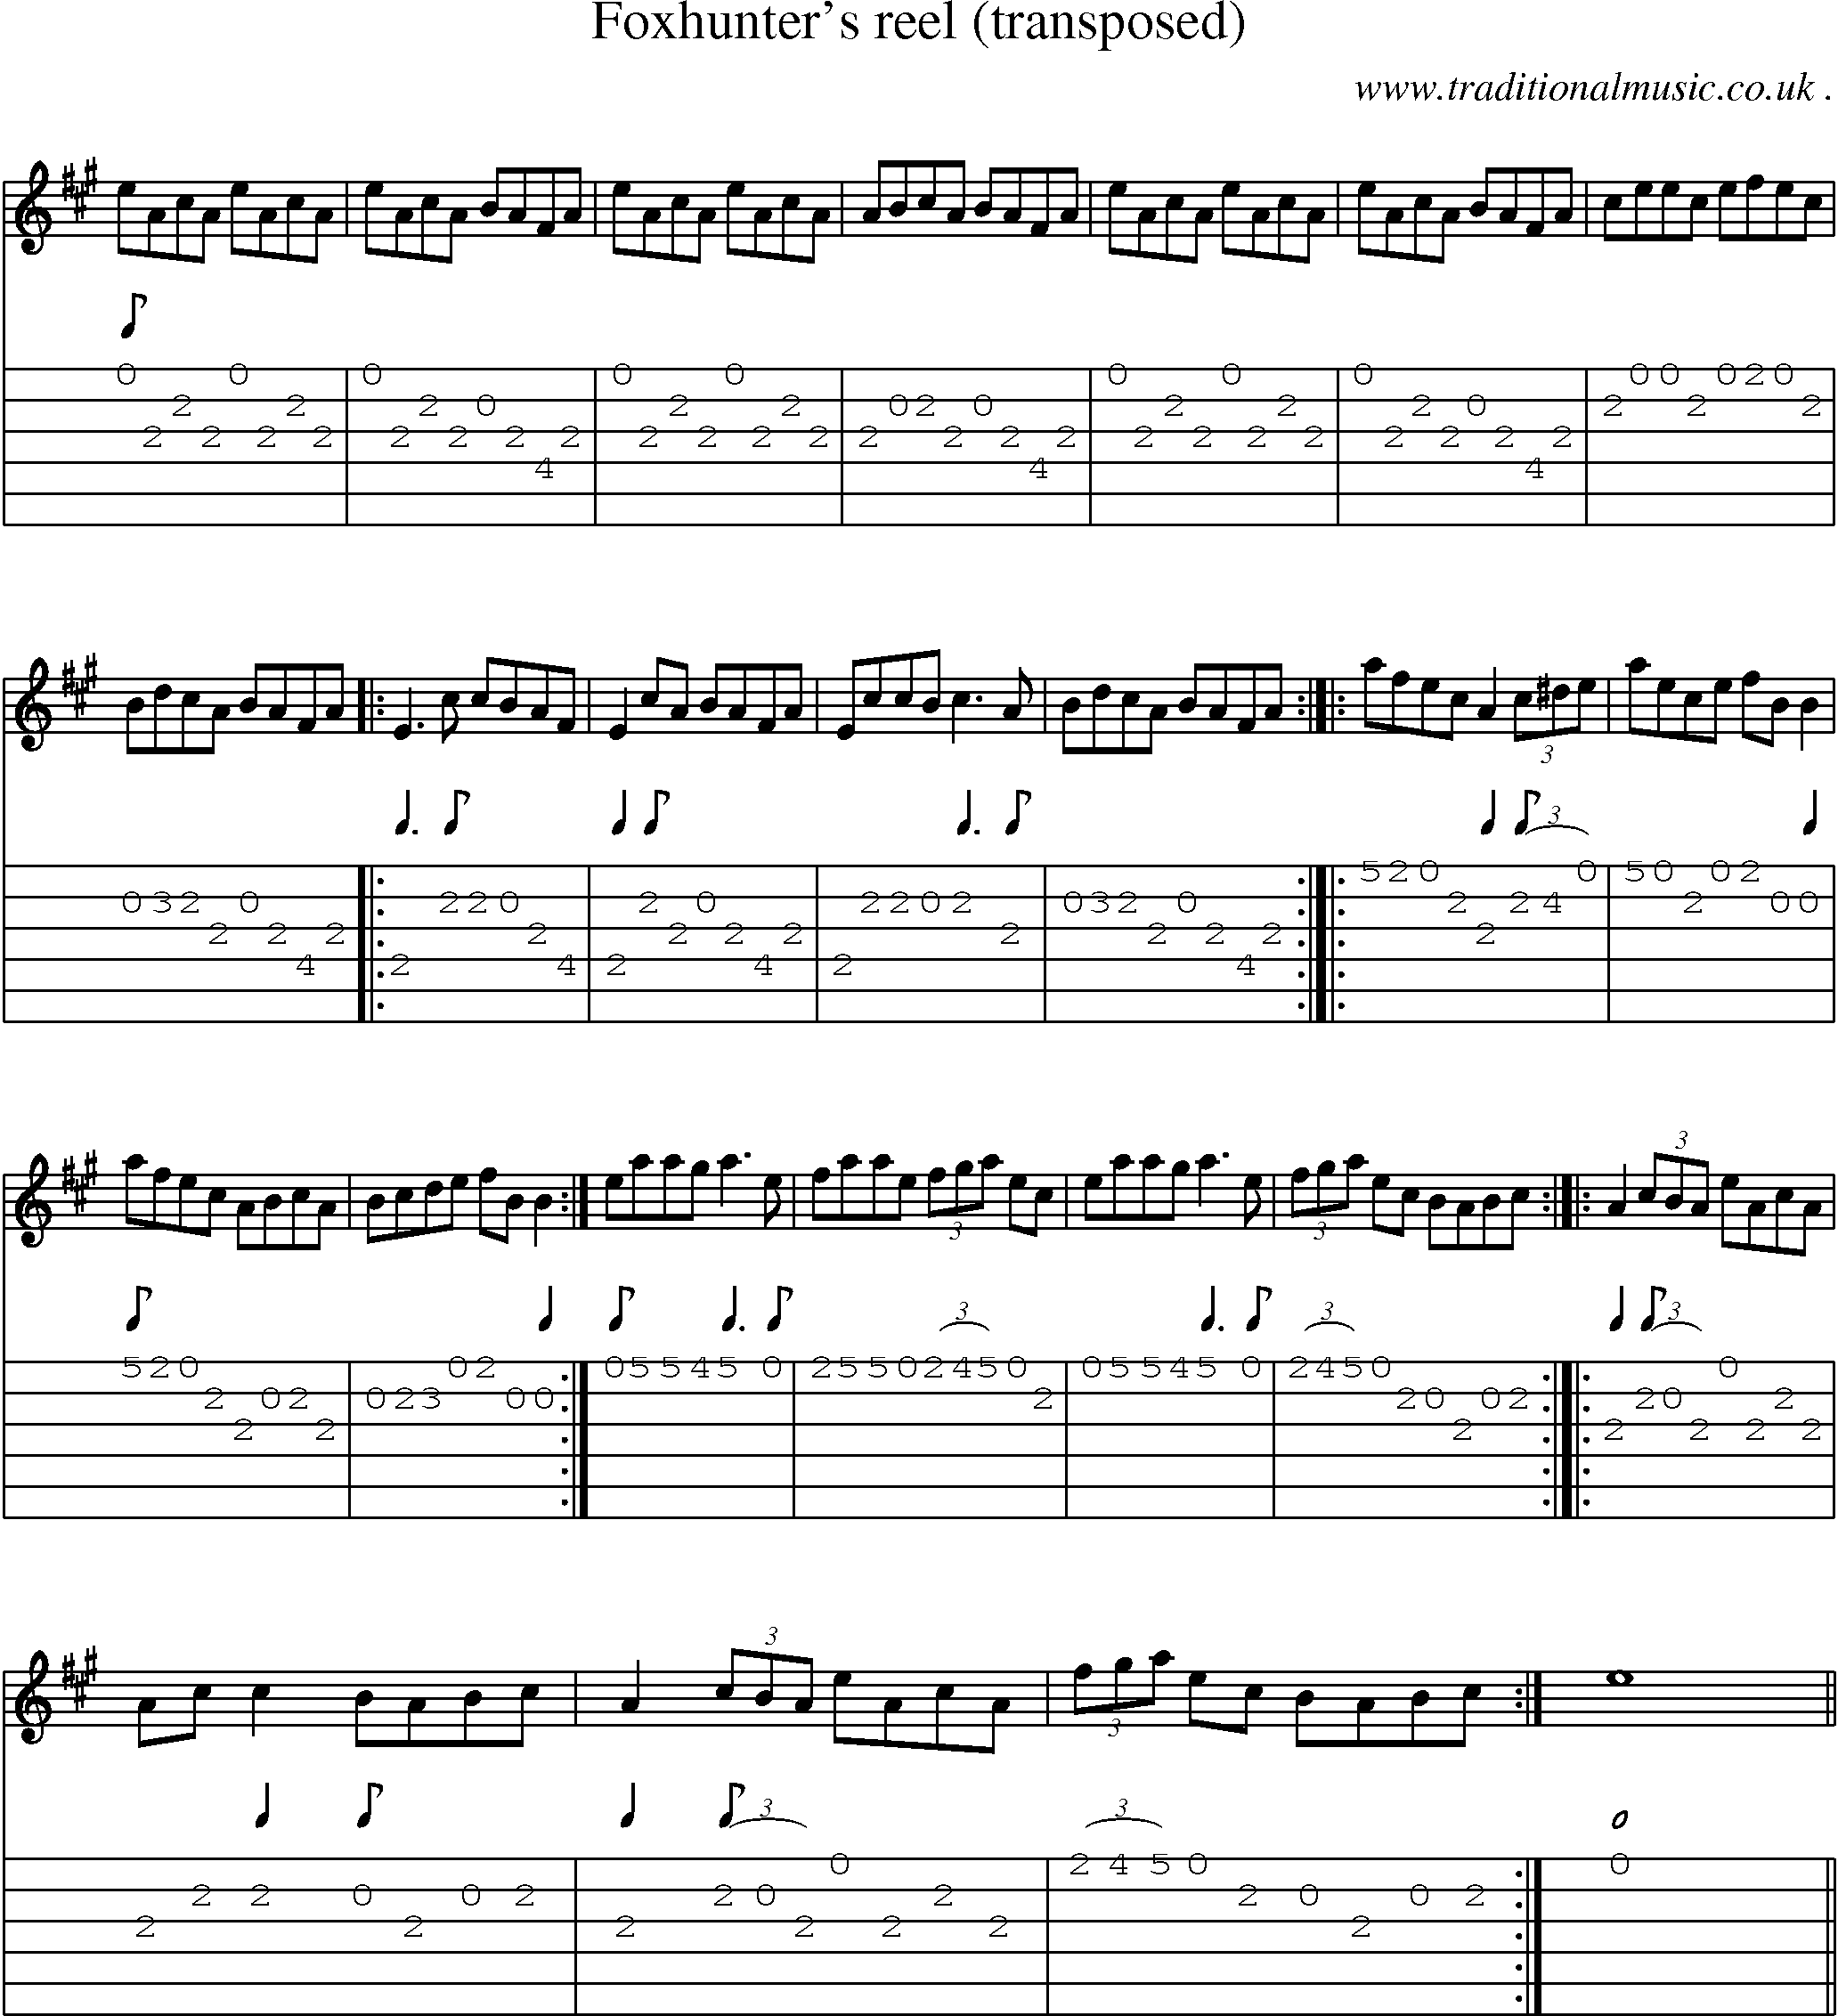 Sheet-Music and Guitar Tabs for Foxhunters Reel (transposed)